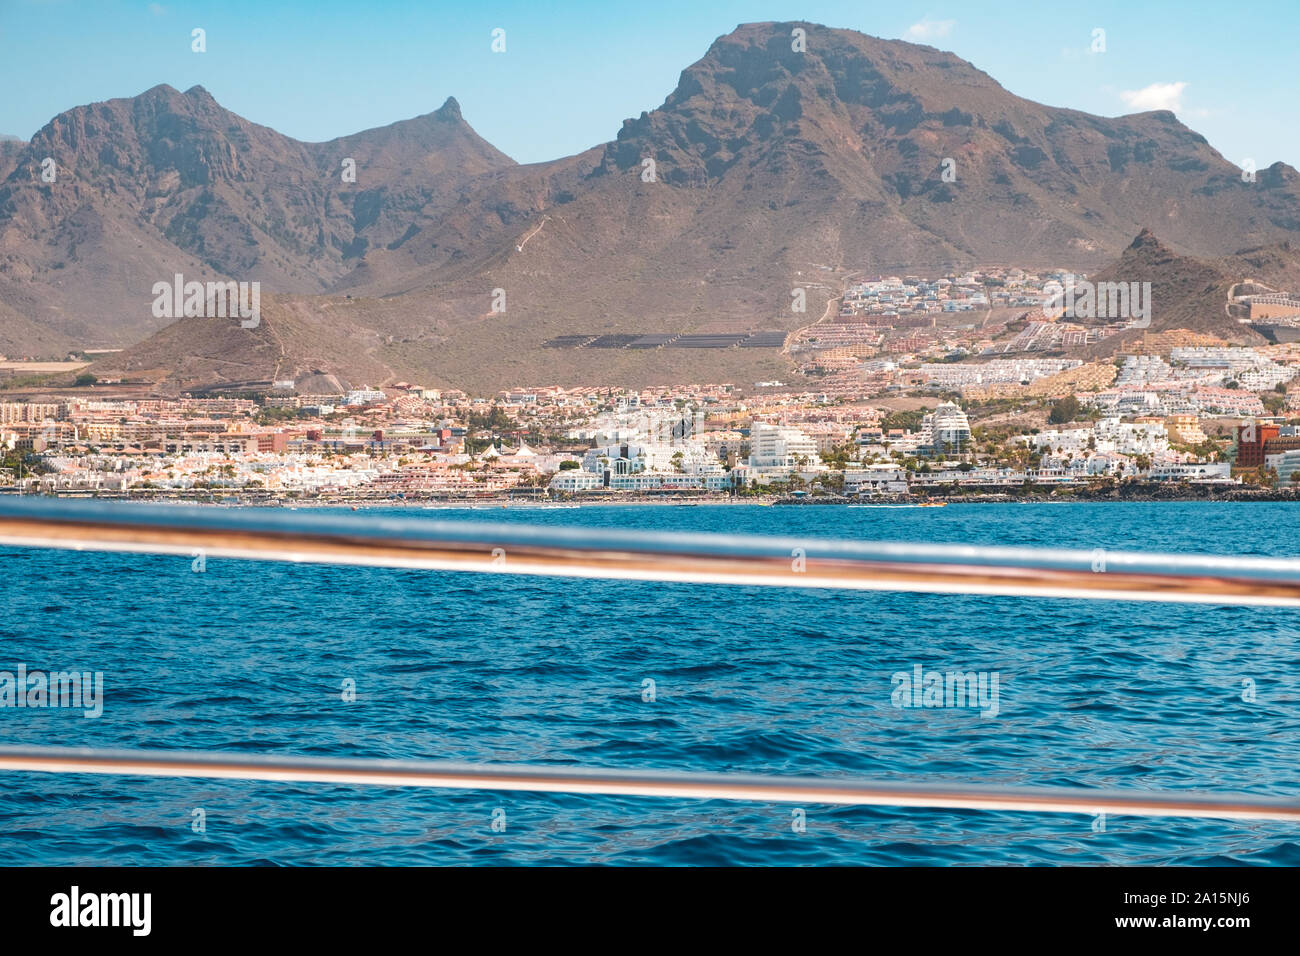 Ocean front hotels at coast view from boat on shore with mountain background Stock Photo